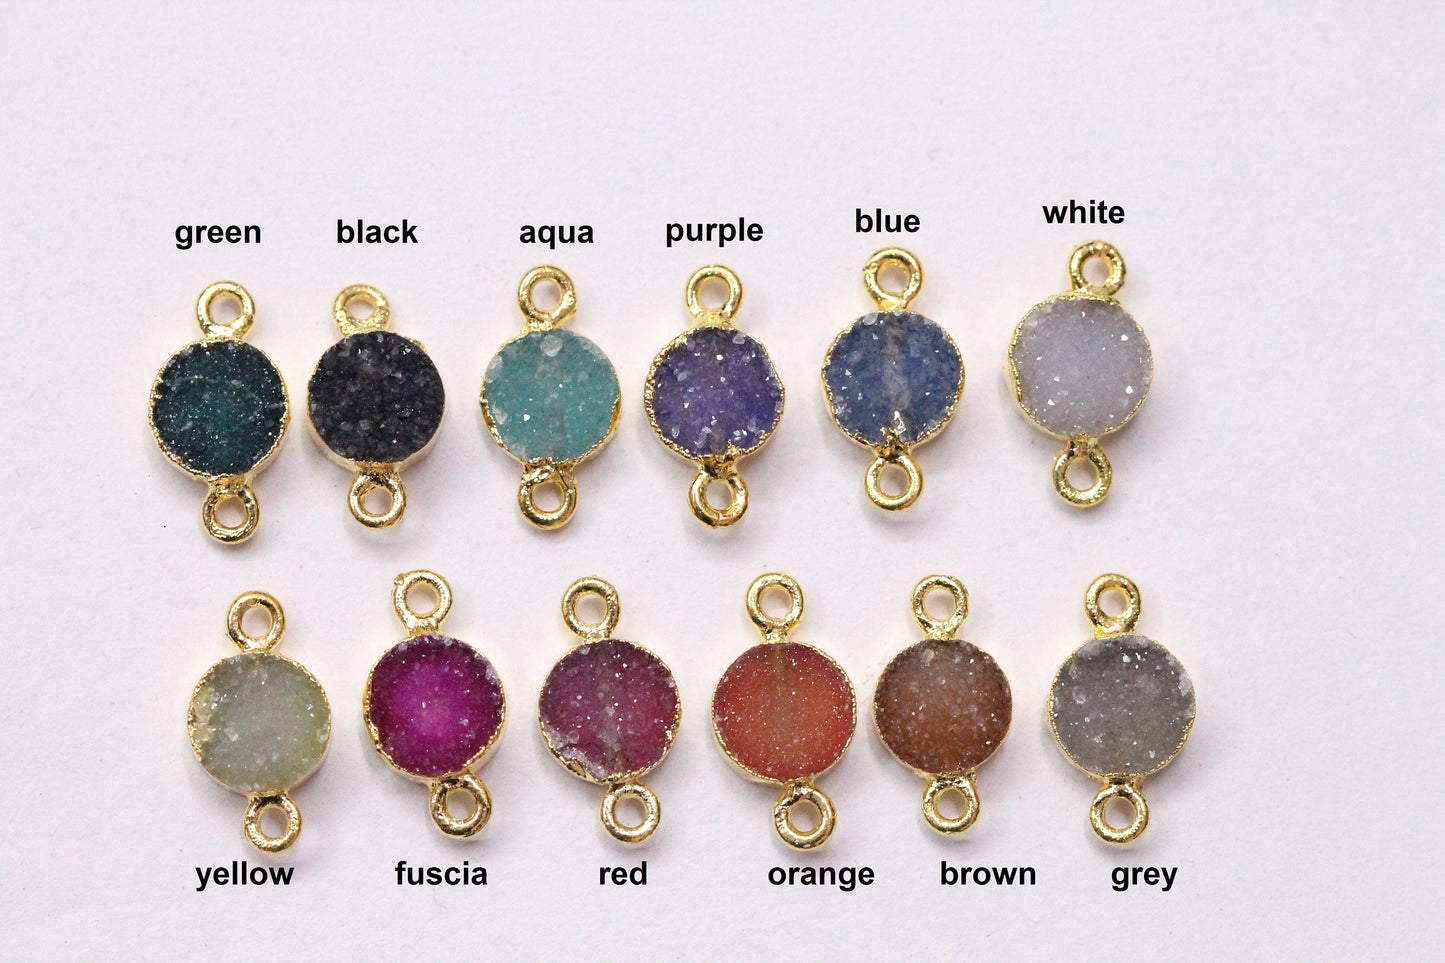 Dainty Natural Druzy Charms for Earrings, Bracelets & Necklaces, 8 MM Round - Meena Design